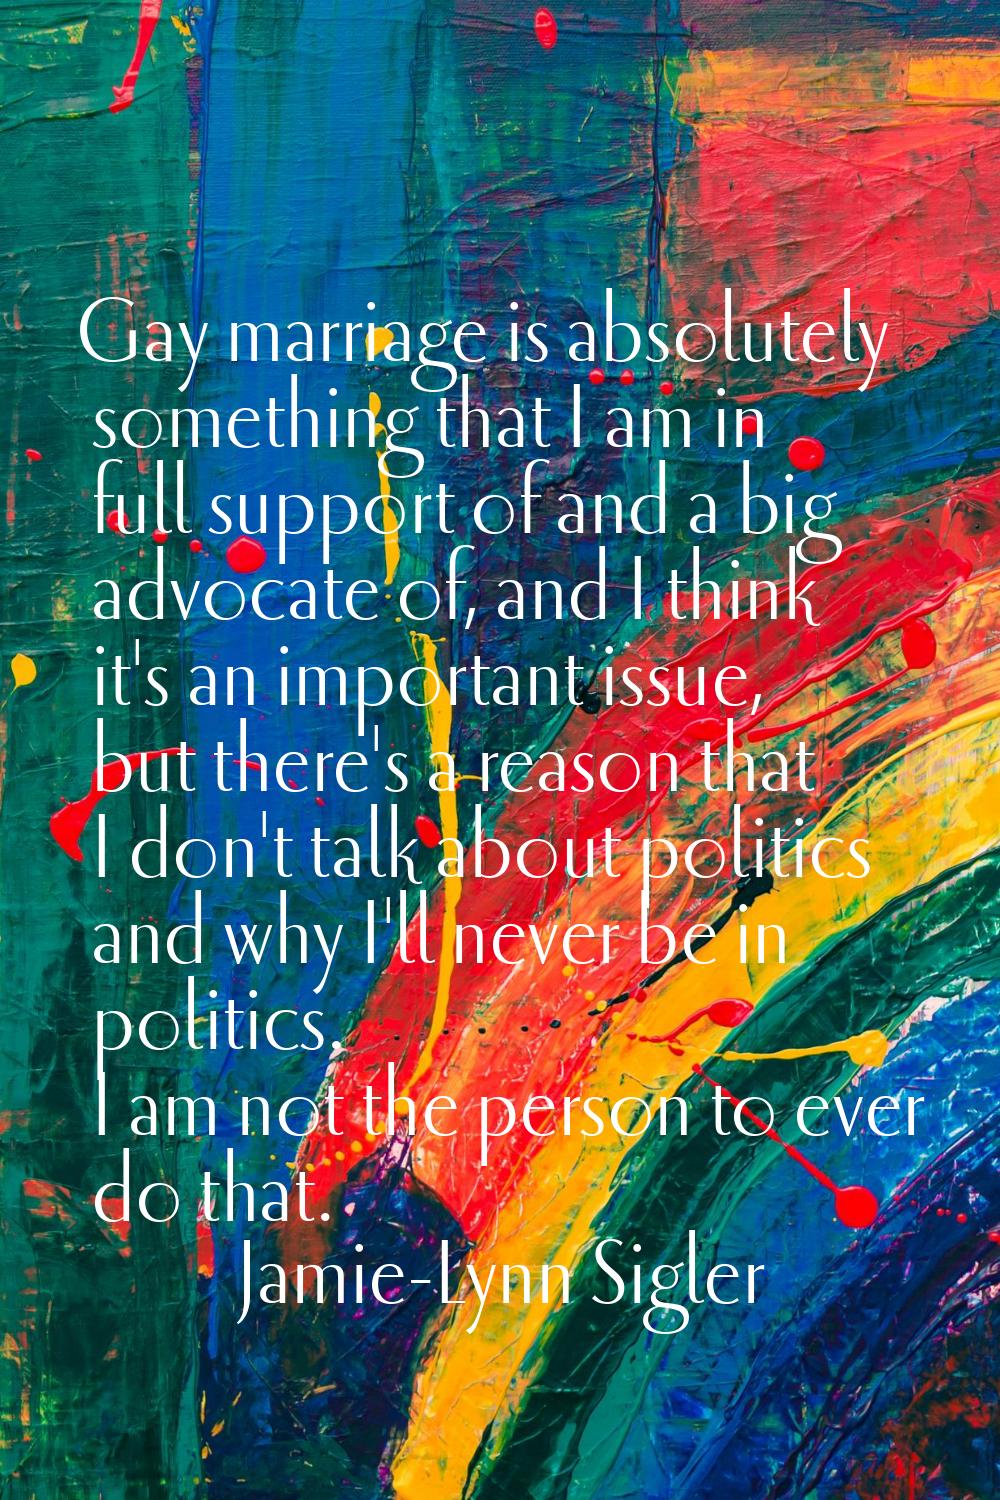 Gay marriage is absolutely something that I am in full support of and a big advocate of, and I thin